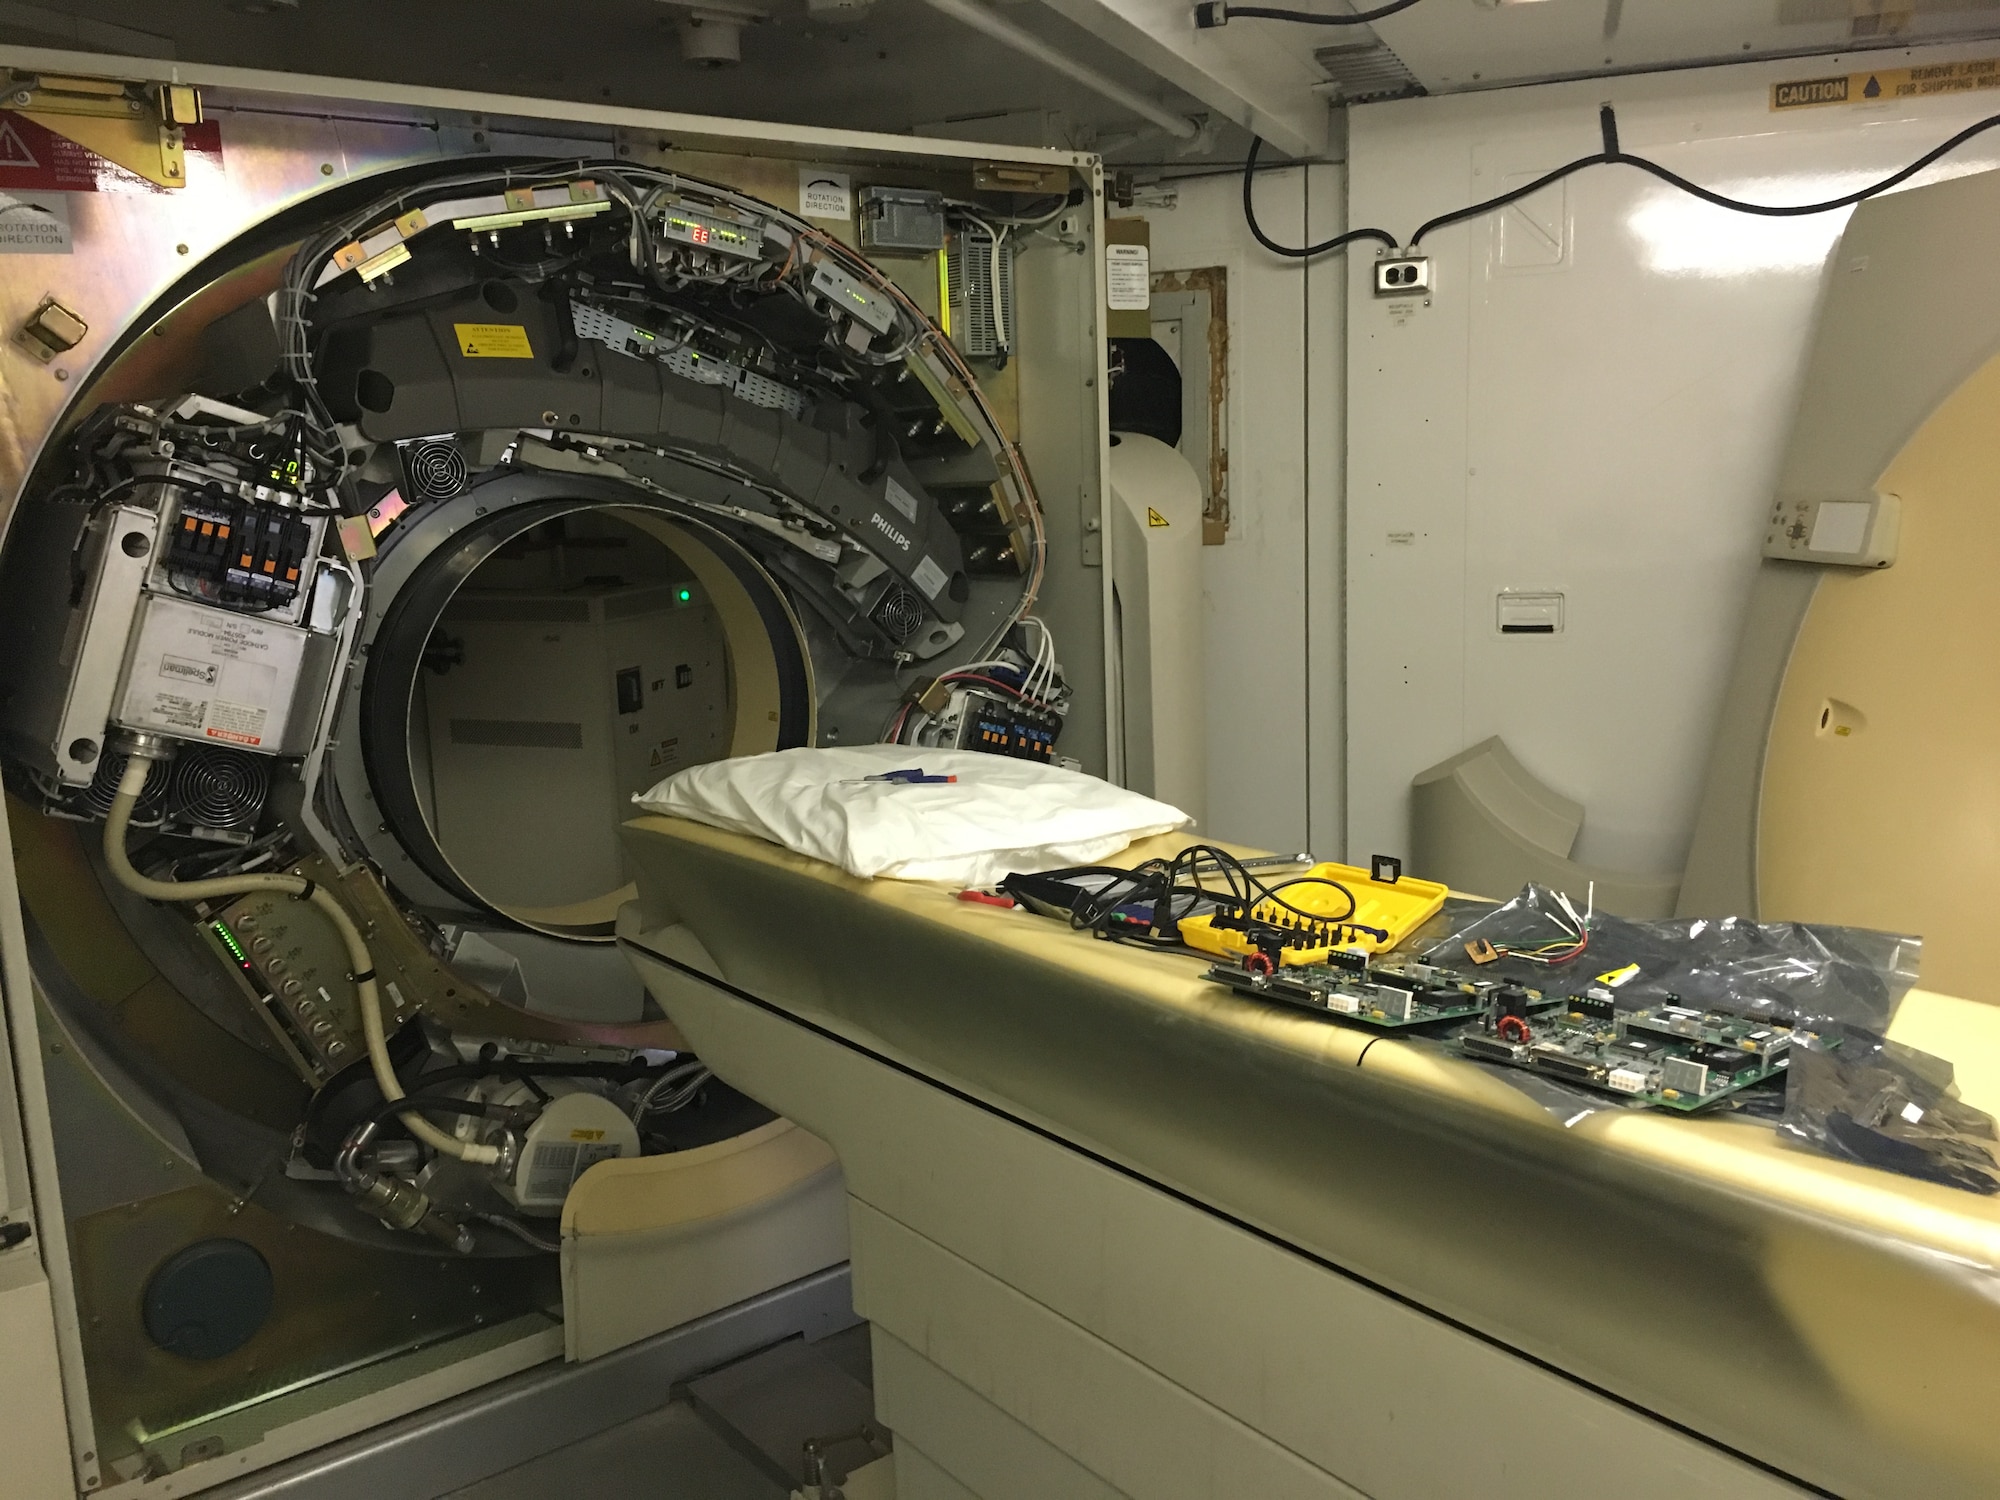 The inside of a new Computed Tomography scanner is shown as it is installed at Al Udeid Air Base, Qatar, Oct. 15, 2016. The CT scanner provides the capability to take three-dimensional images of the human body, making it easier and quicker to accurately diagnose a patient. (U.S. Air Force photo by Senior Airman Miles Wilson)
